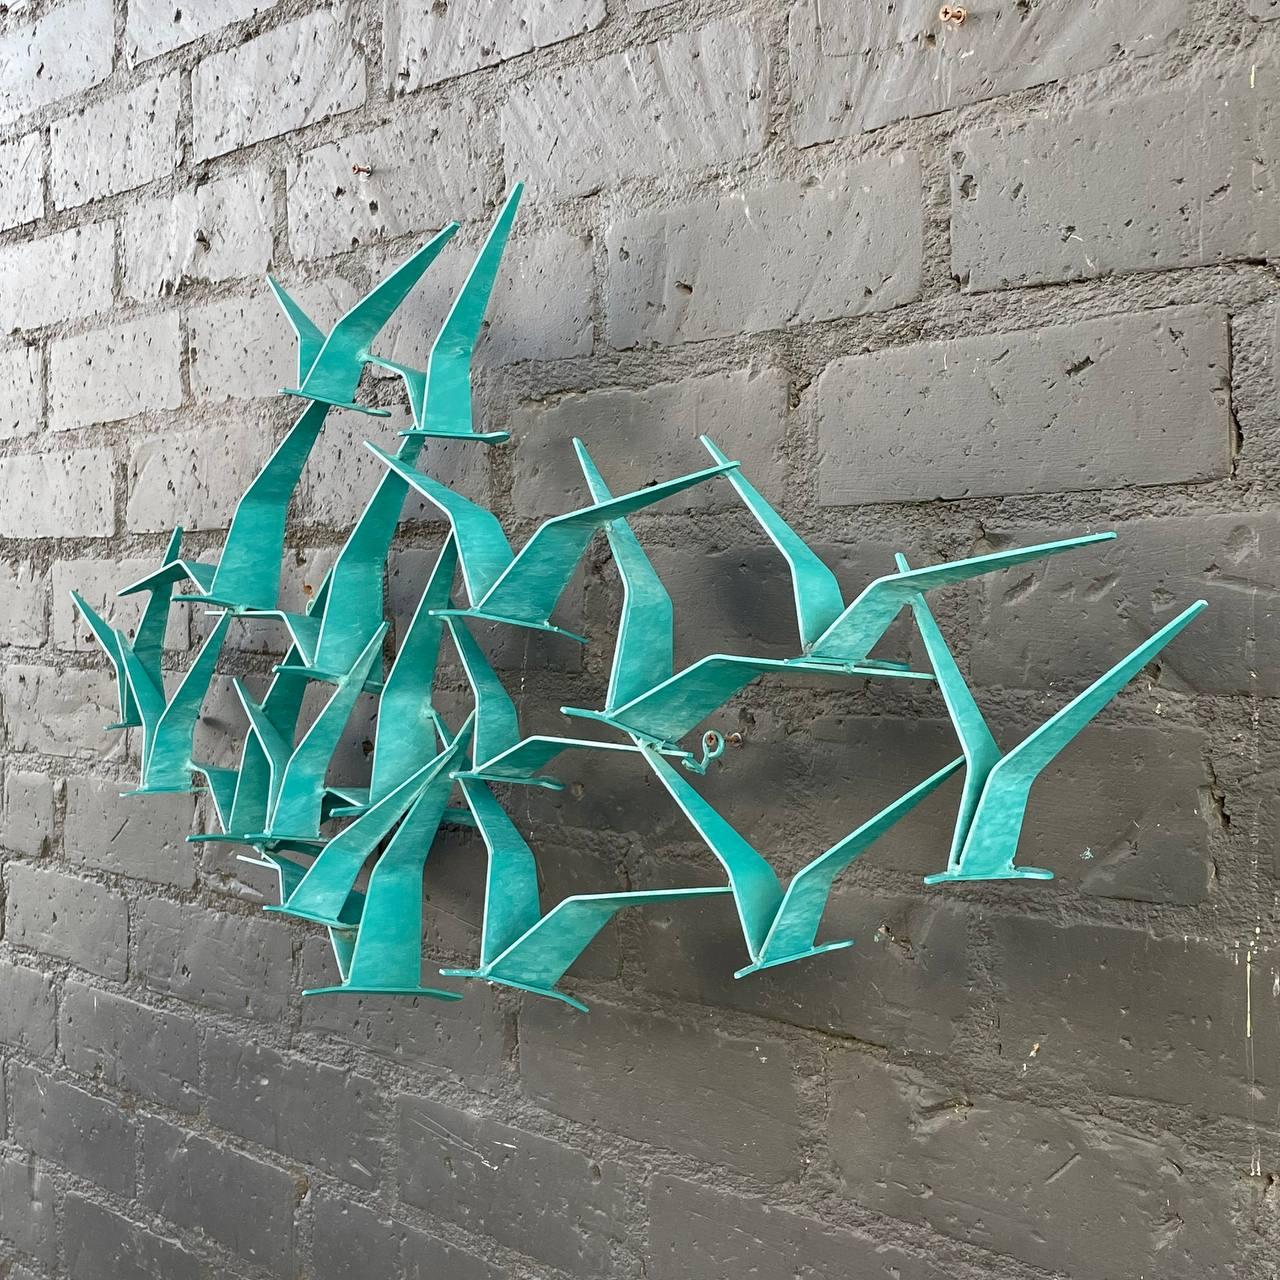 Signed Mid-Century Modern “Flock of Birds” Wall Sculpture by Curtis Jere

Original Vintage Condition
Materials: Original Painted Metal

Dimensions: 21”H x 44.50”W x 5.50”D